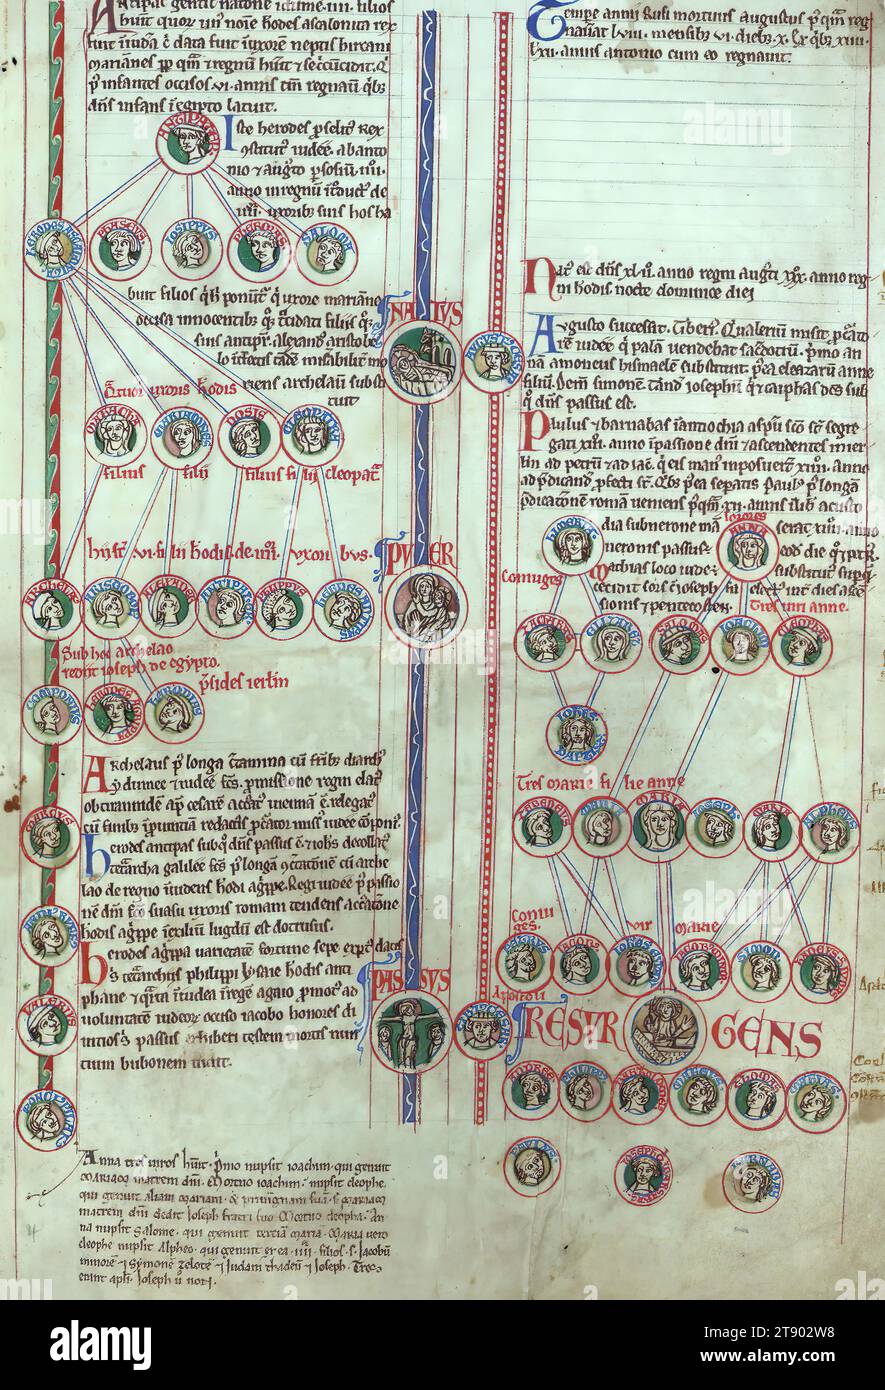 Peter of Poitier's Historical Genealogy of Christ, Genealogy of Christ from Herodes to Tiberius Cesar, This English manuscript was created in the early thirteenth century, soon after the death of its author, Peter of Poitiers, theologian and Chancellor of the University of Paris from 1193 to 1205. It is an early copy of his text, the Compendium historiae in Genealogia Christi. Intended as a teaching manual aid, the work provides a visual genealogy of Christ, comprised of portraits in roundels, accompanied by a text discussing the historical background of Christ's lineage Stock Photo